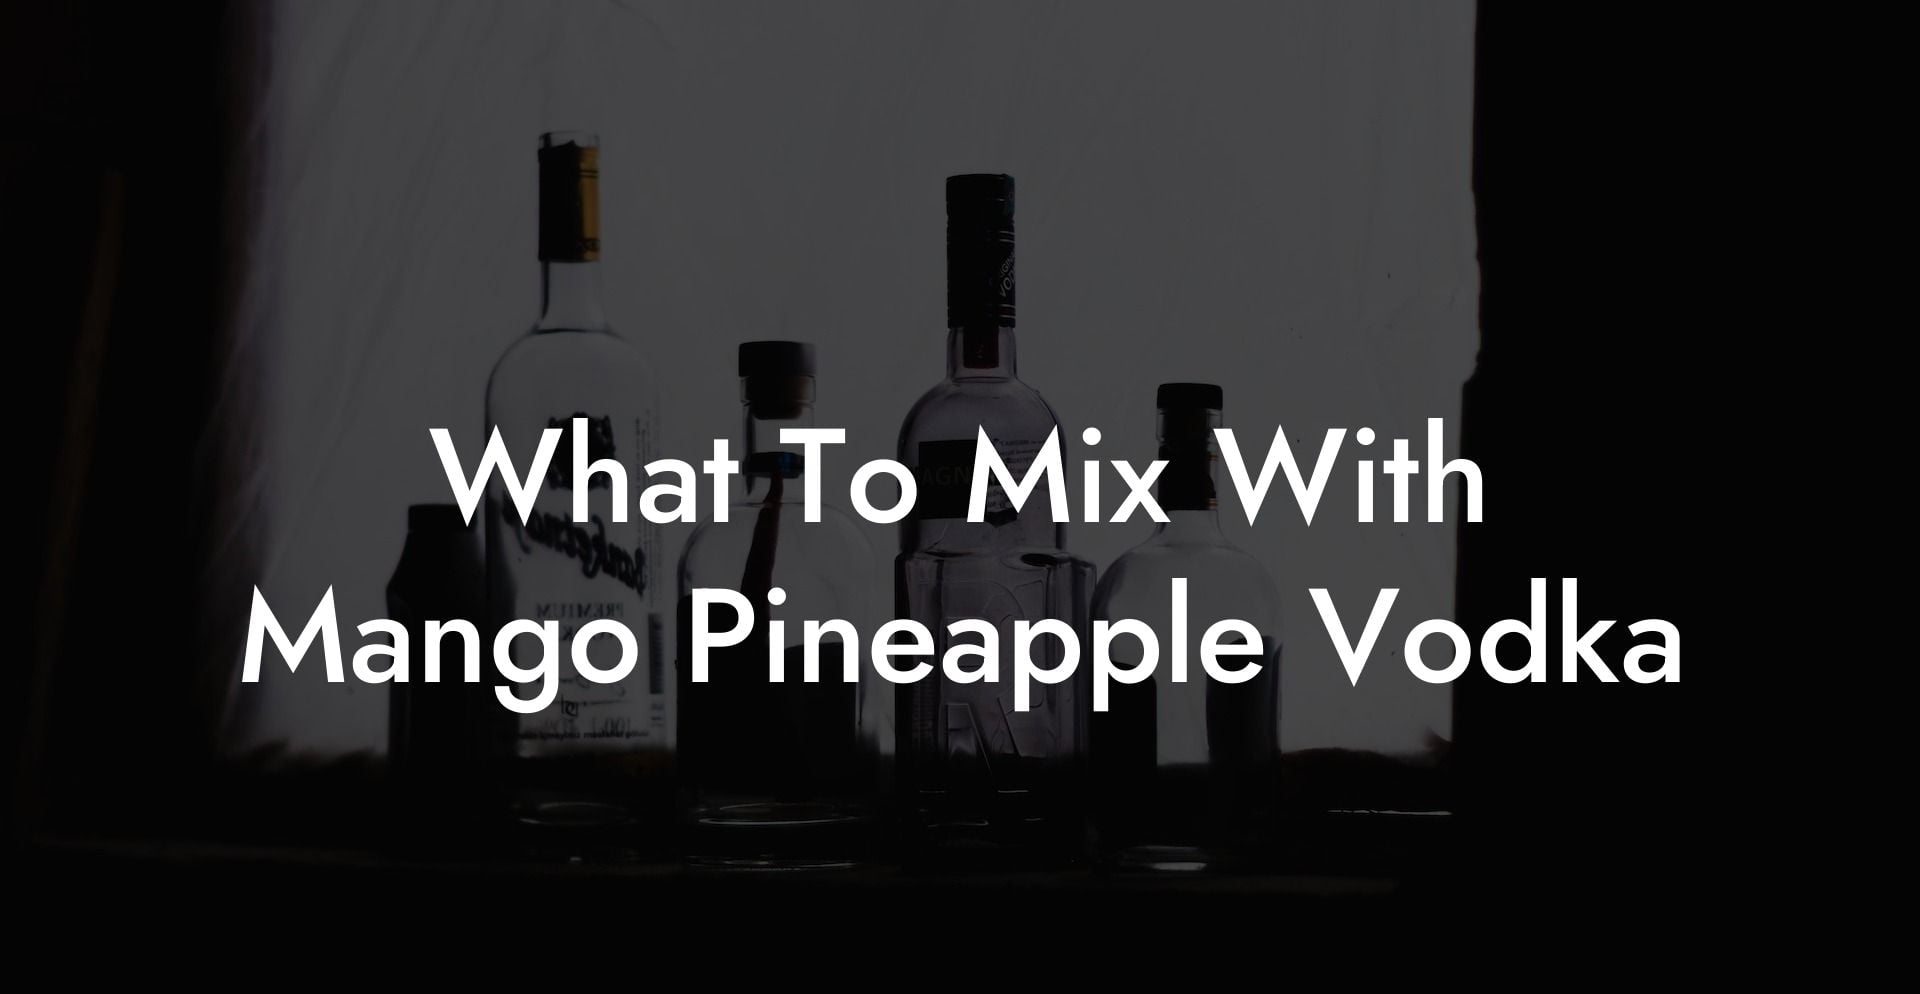 What To Mix With Mango Pineapple Vodka